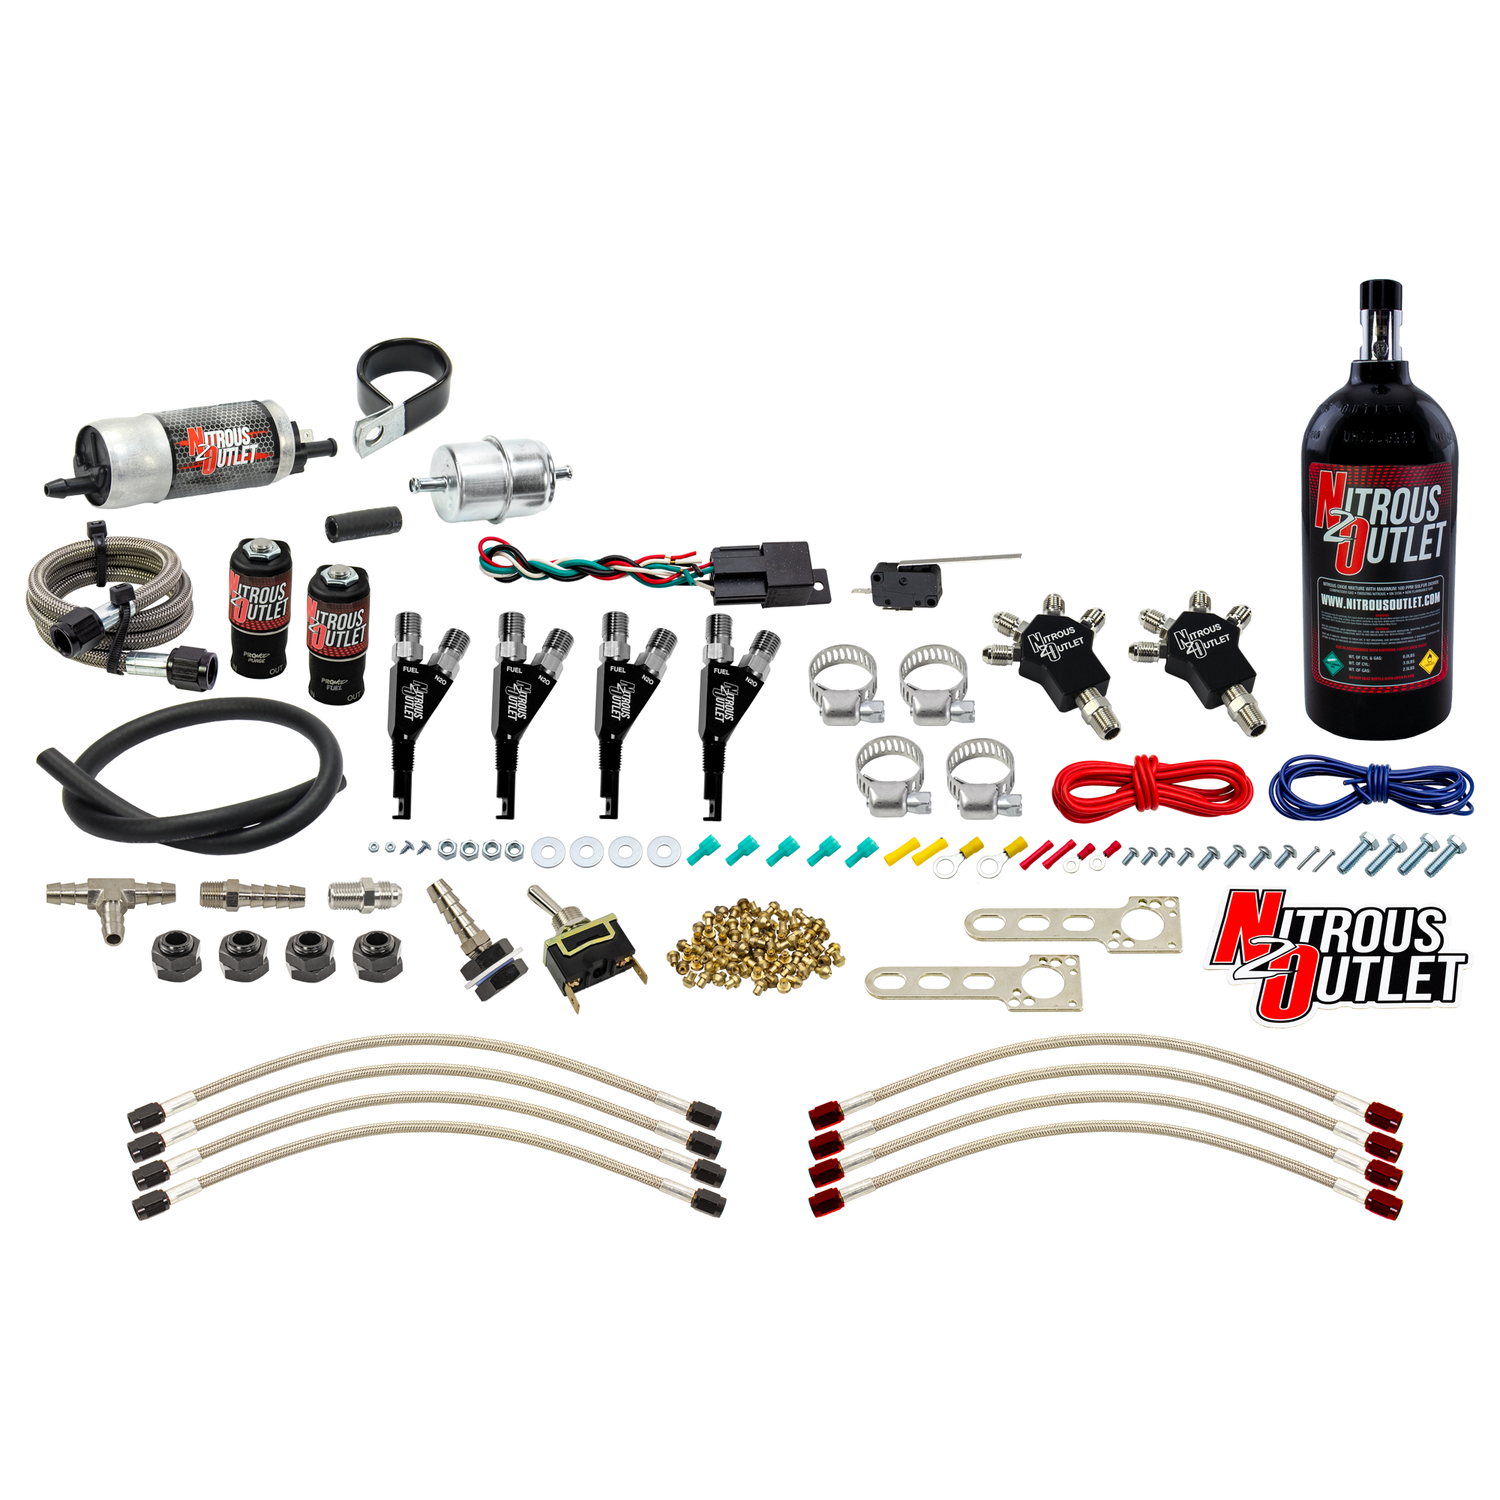 Four Cylinder Powersports Carbureted Nitrous Systems